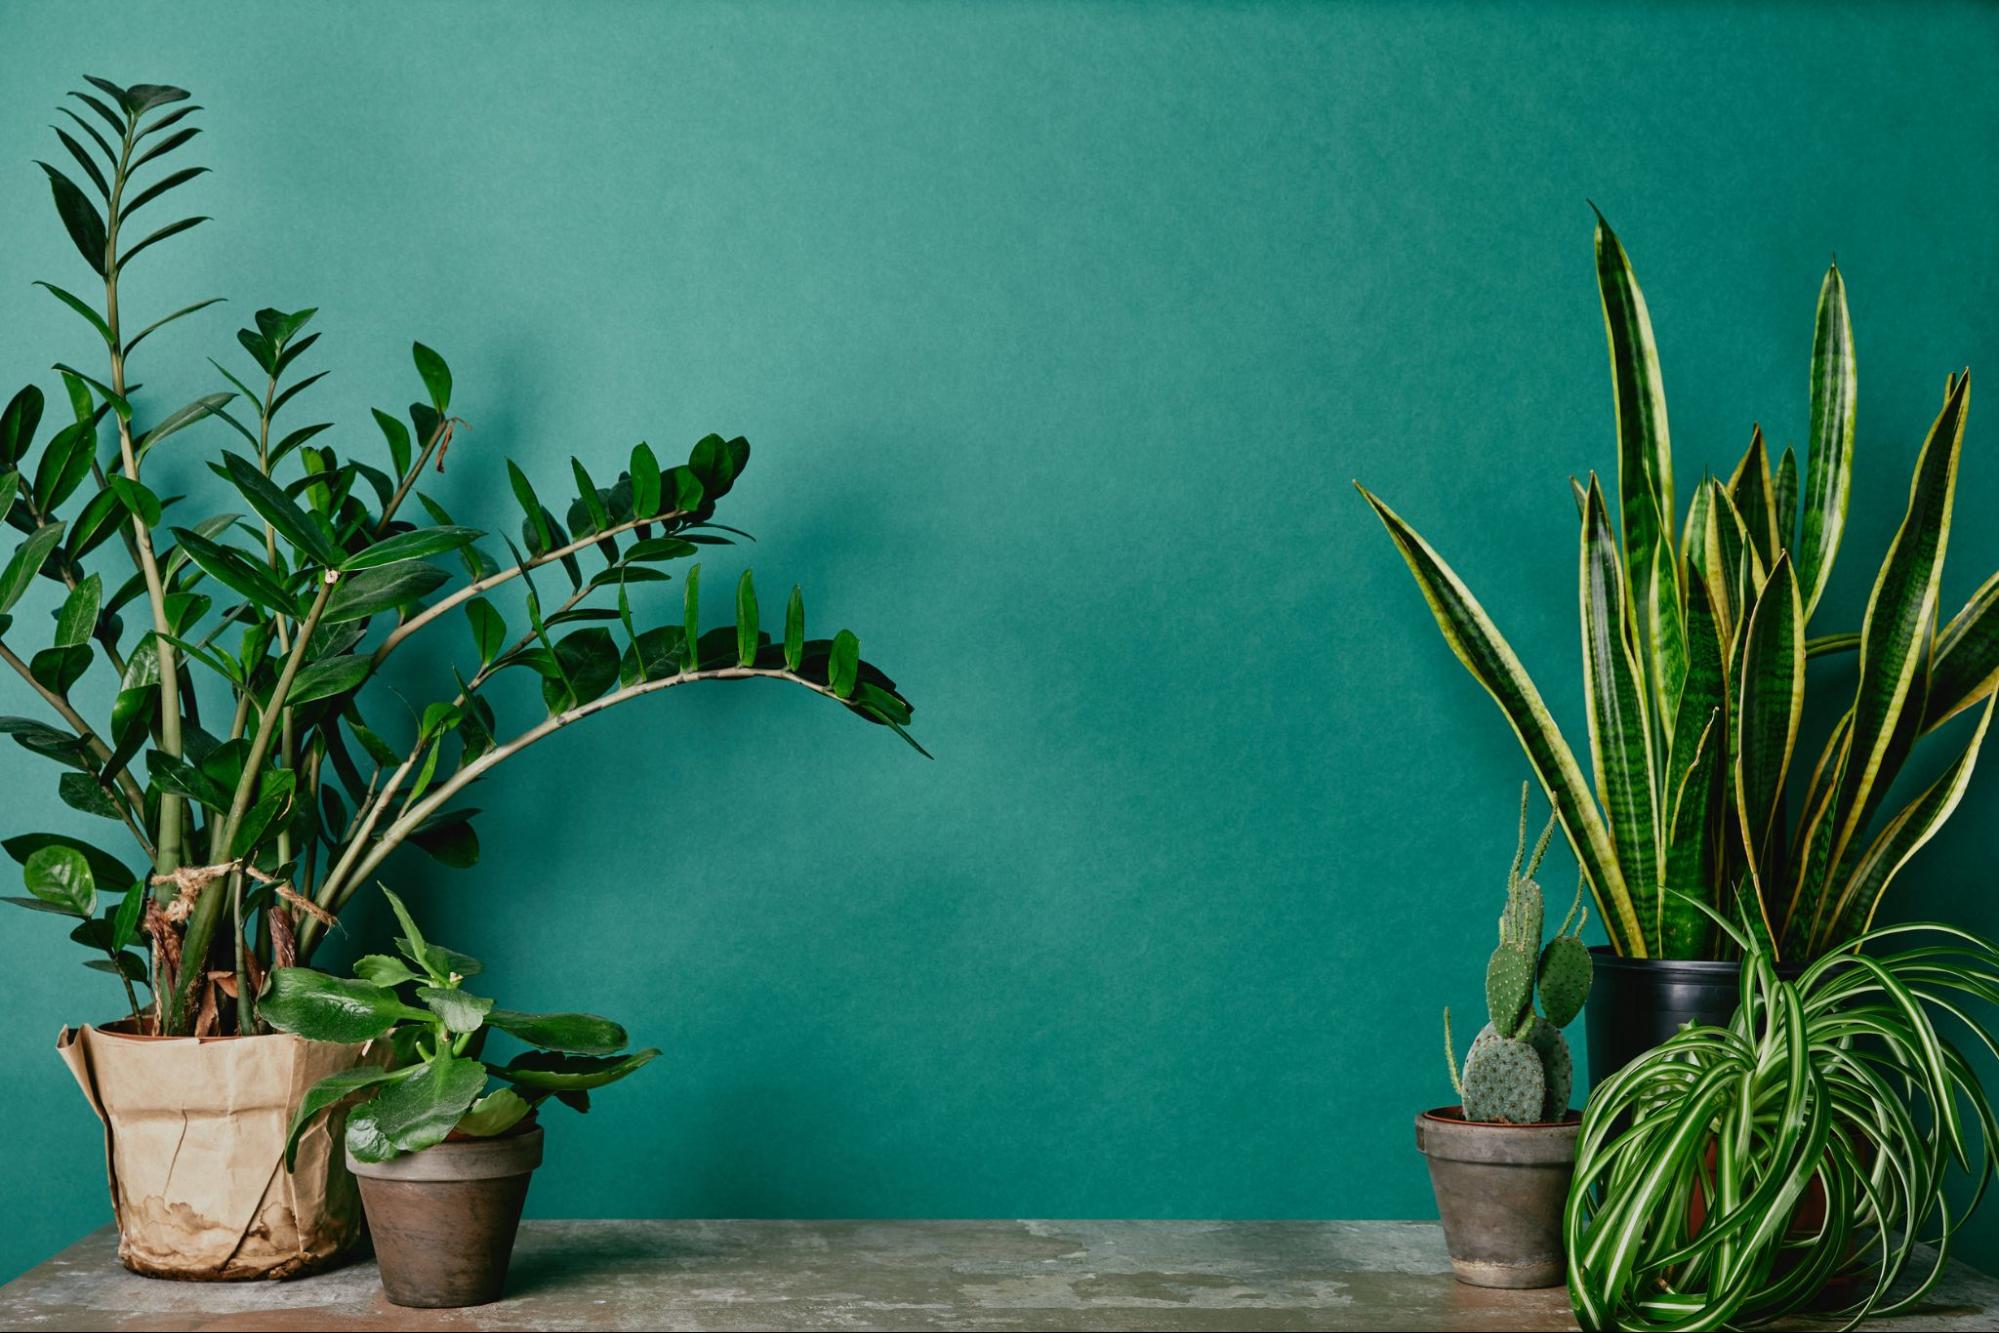 Multiple green plants in pots on table with green wall